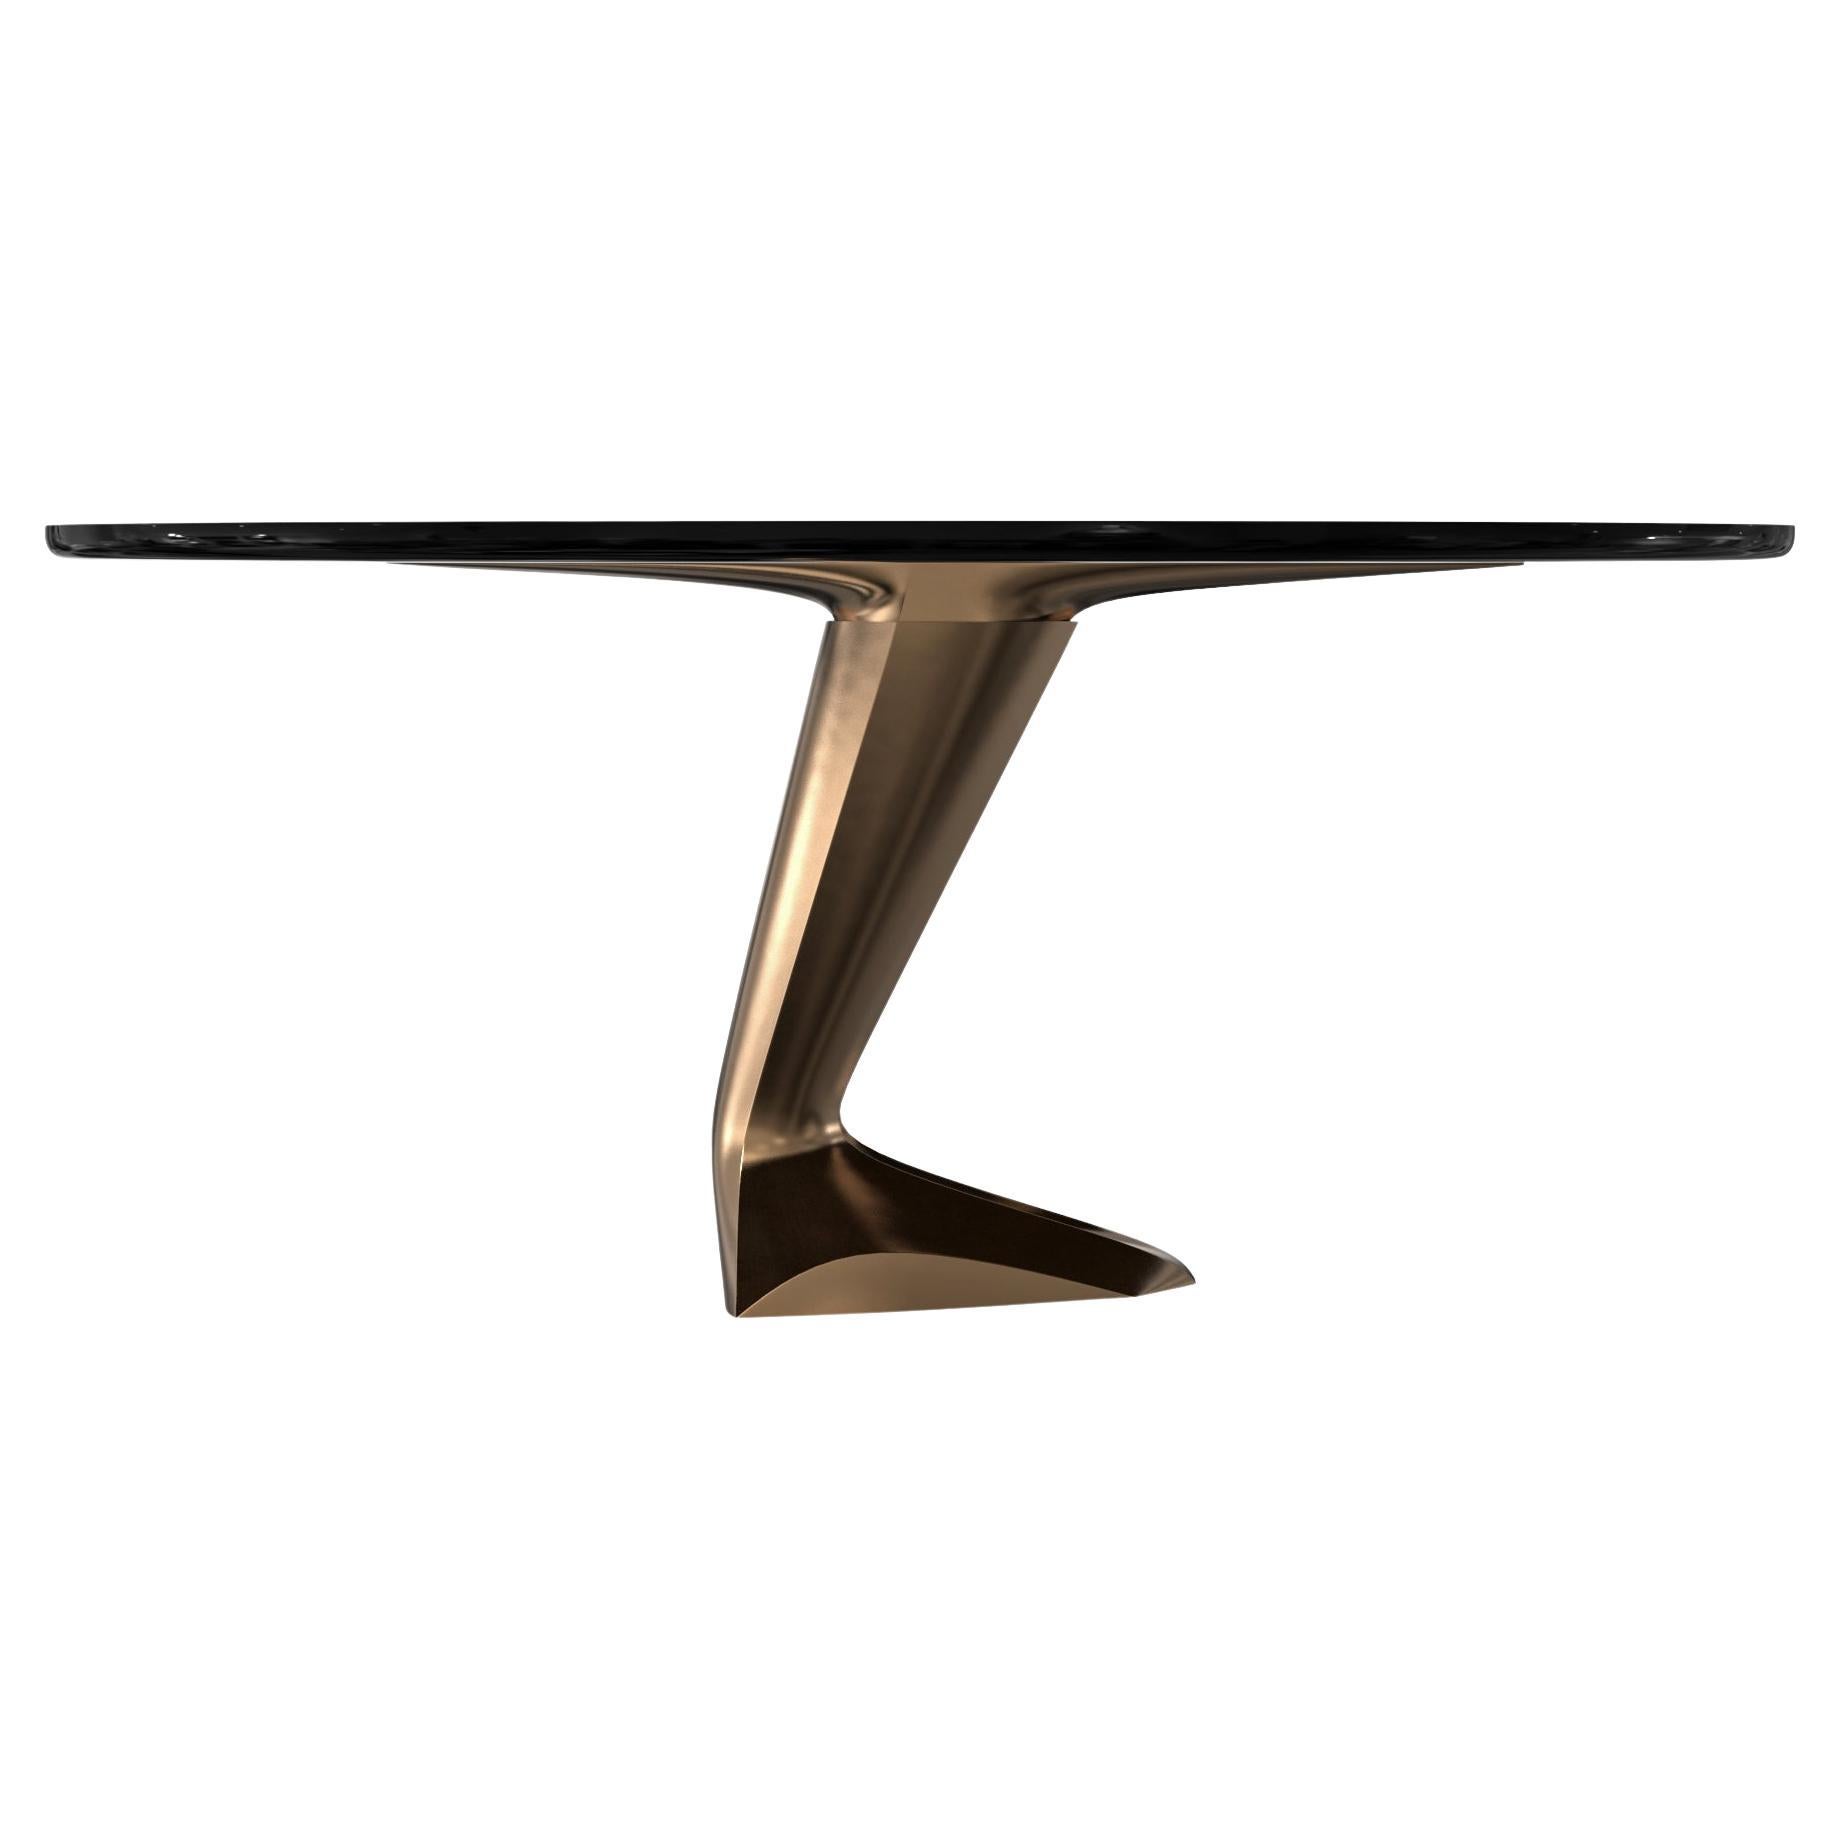 "Evoluzione" Limited Edition Table with Bronze and Stainless Steel, Istanbul For Sale